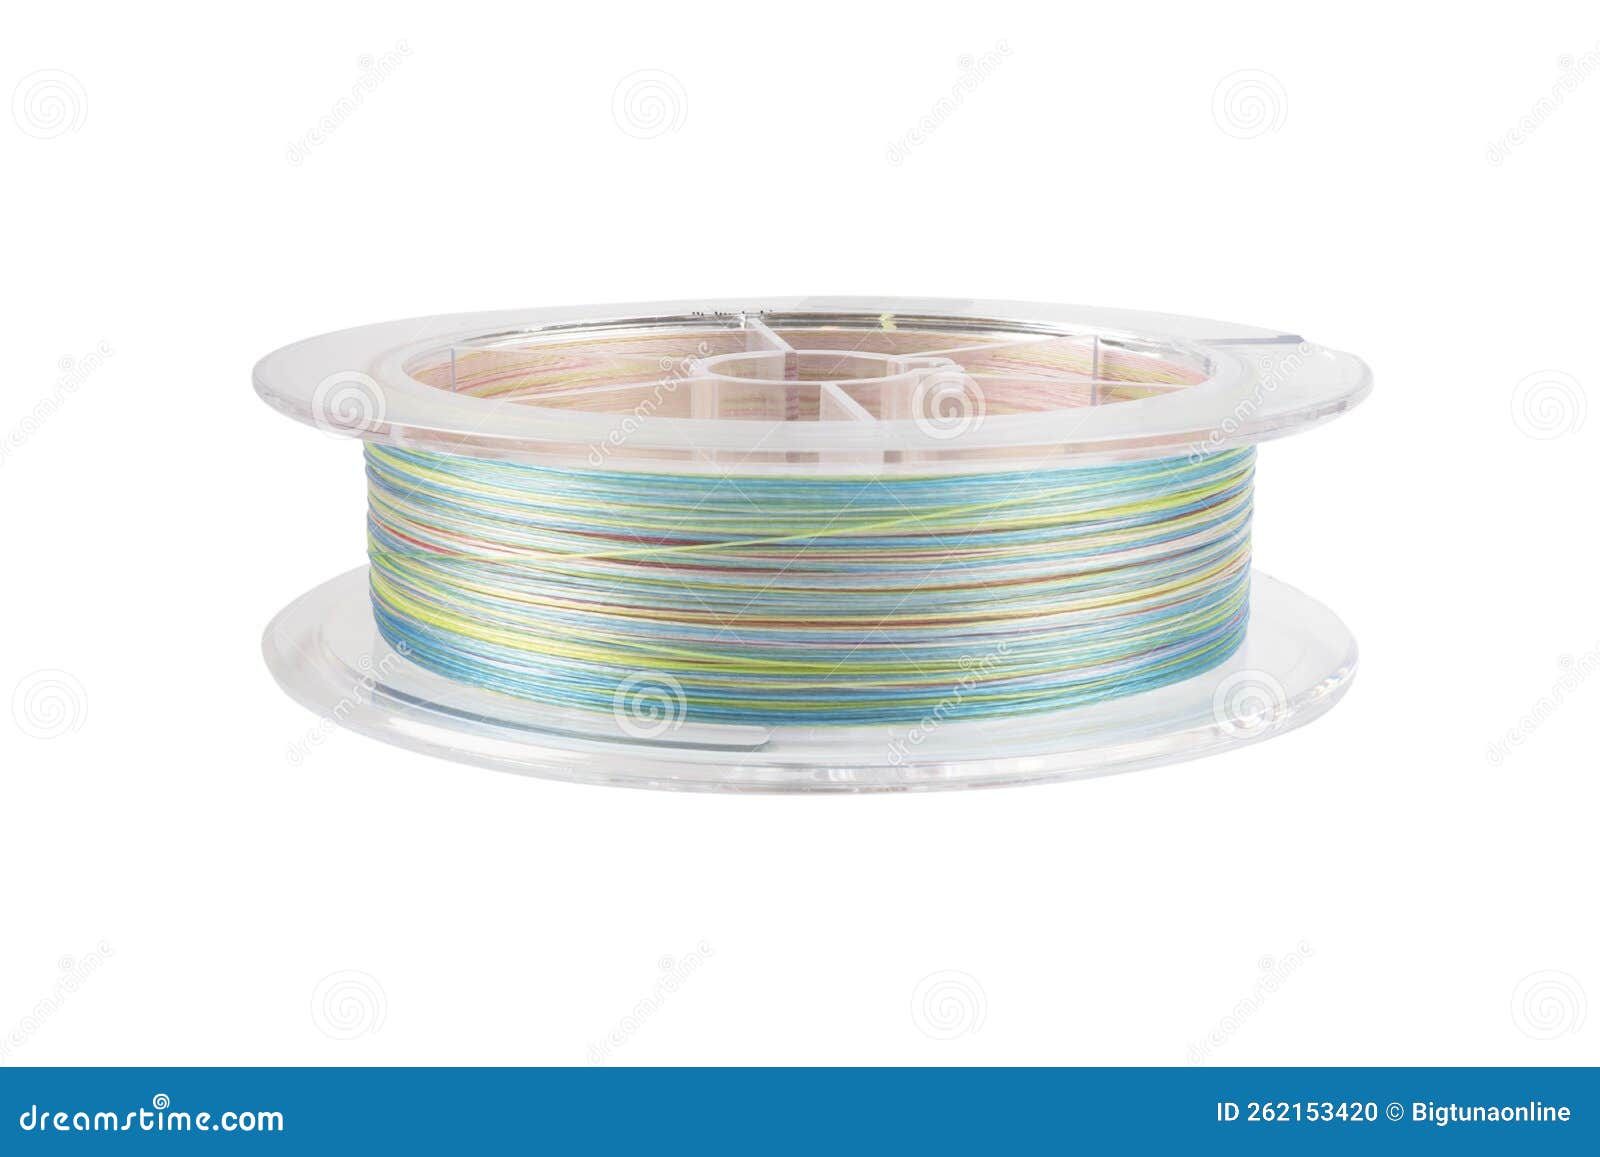 Fishing Braided Line Isolated on White Background. Spool of